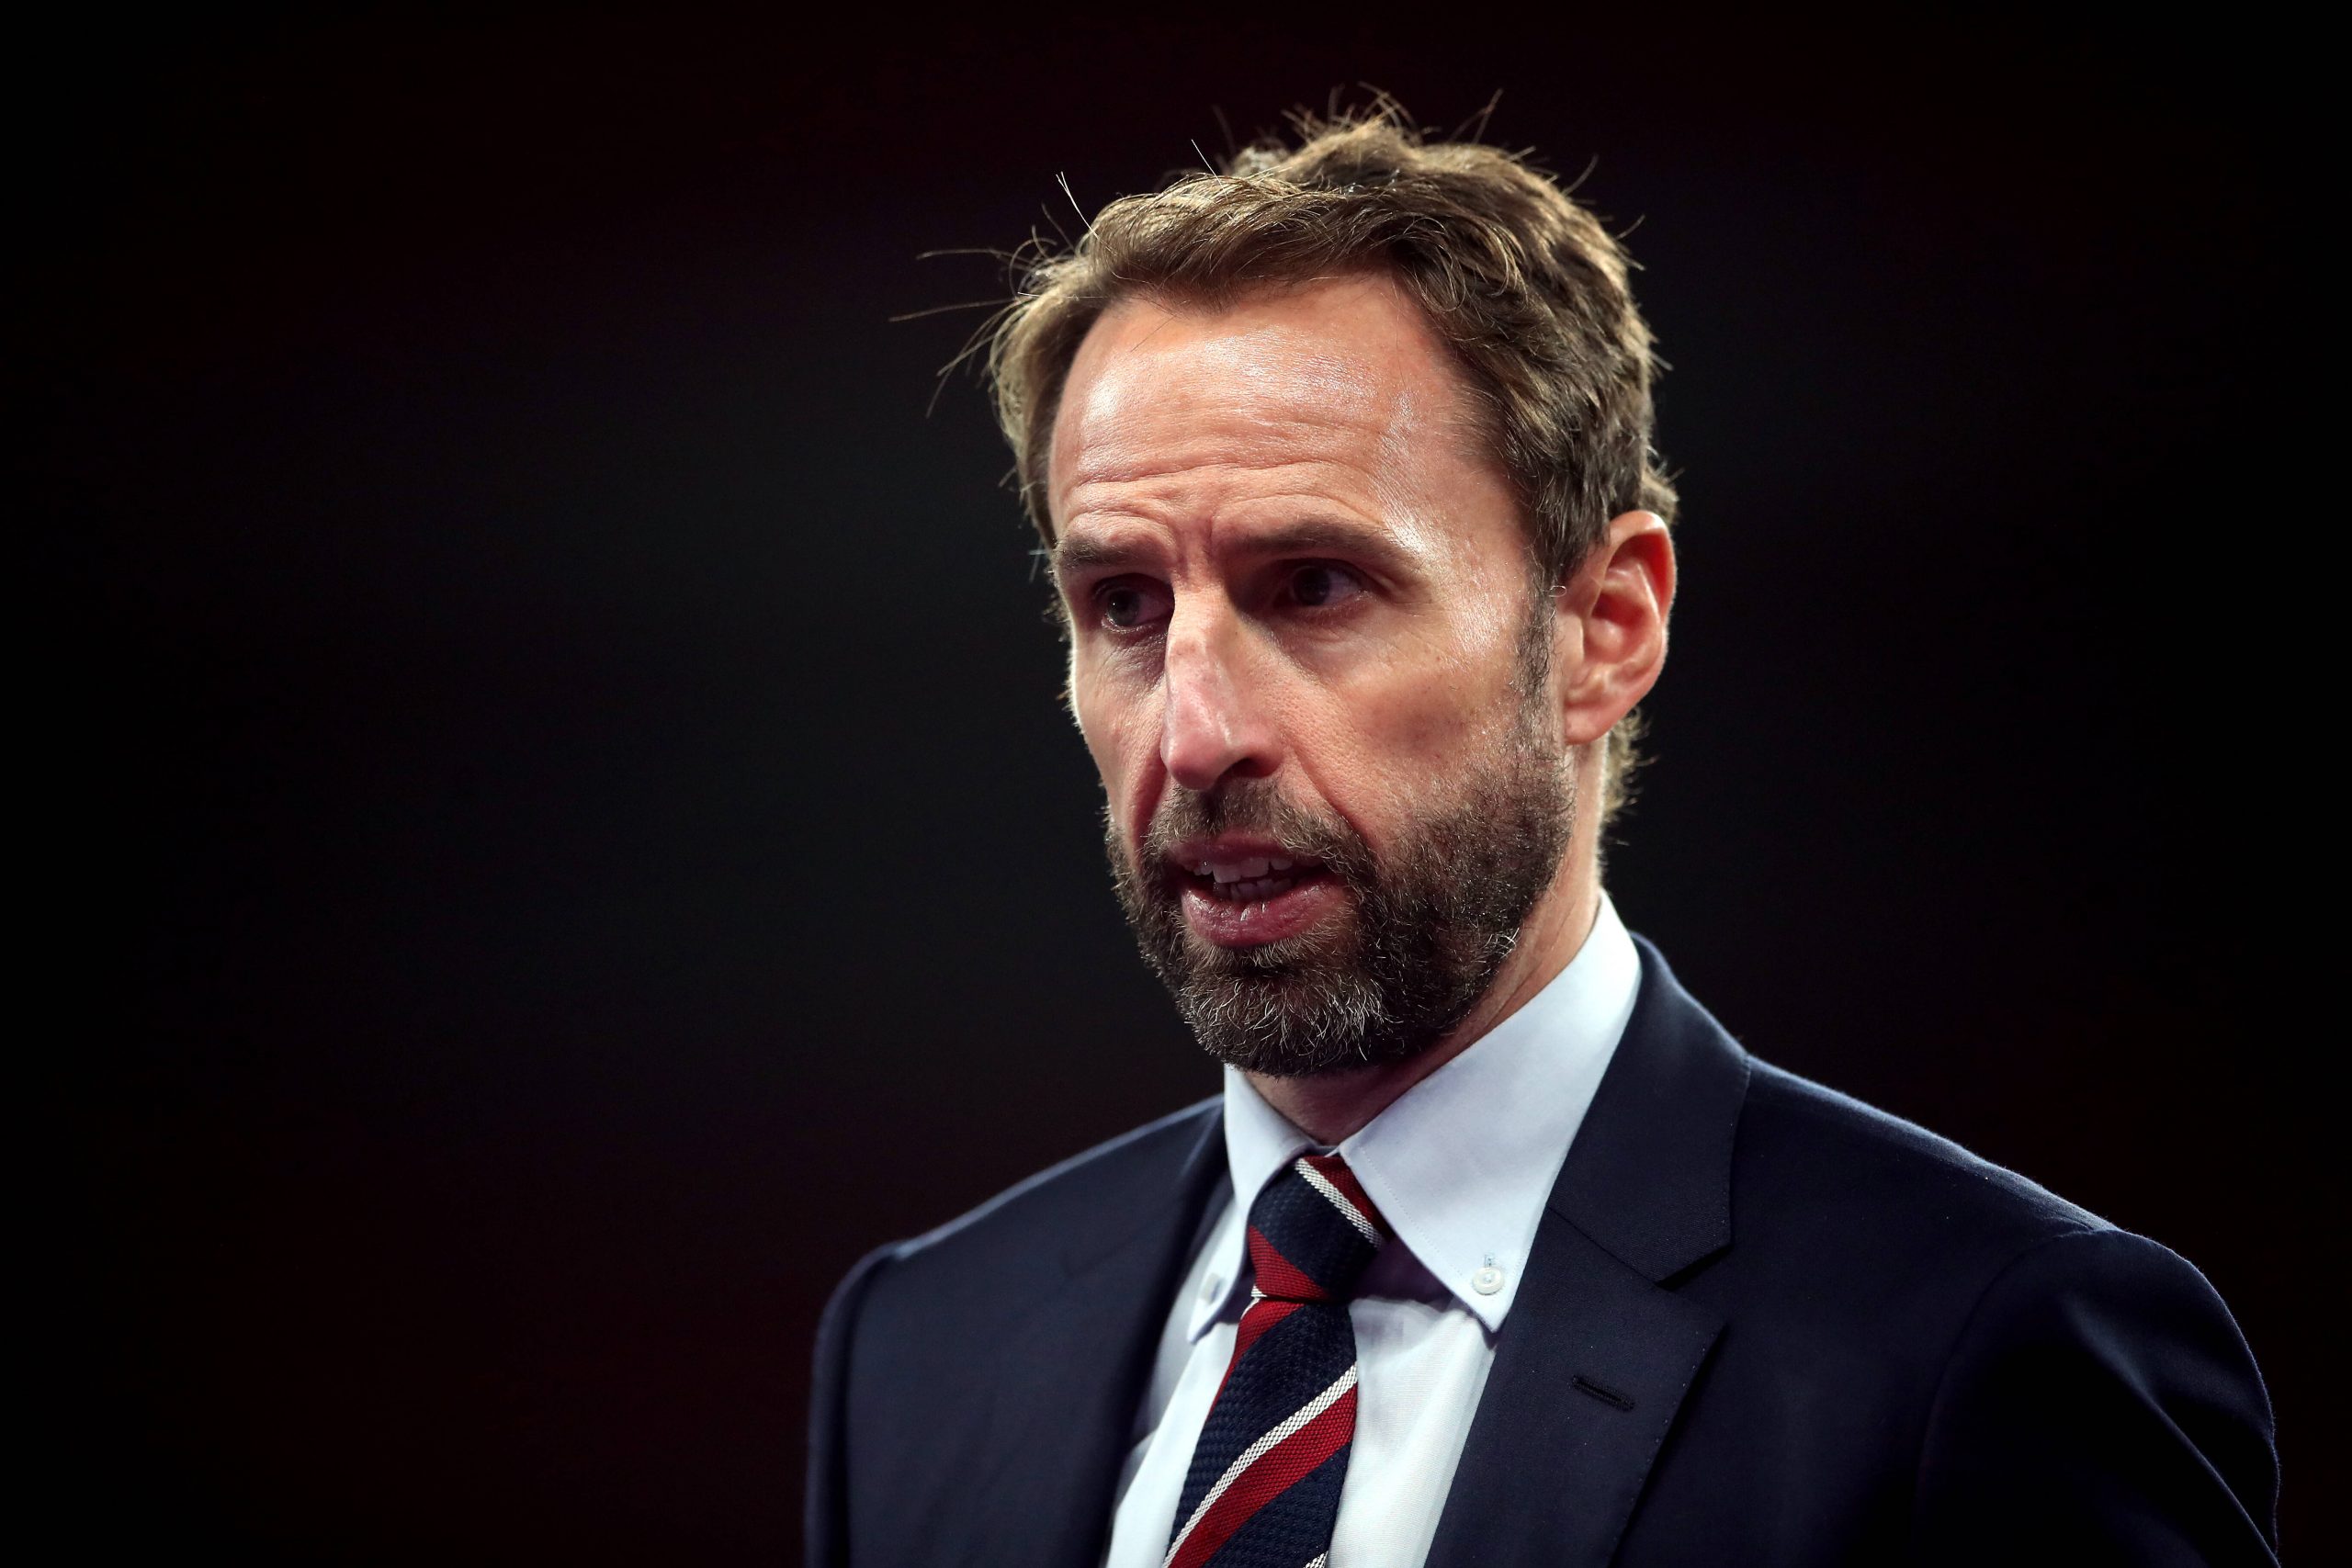 Gareth Southgate ignores Rangers players no matter how good they are